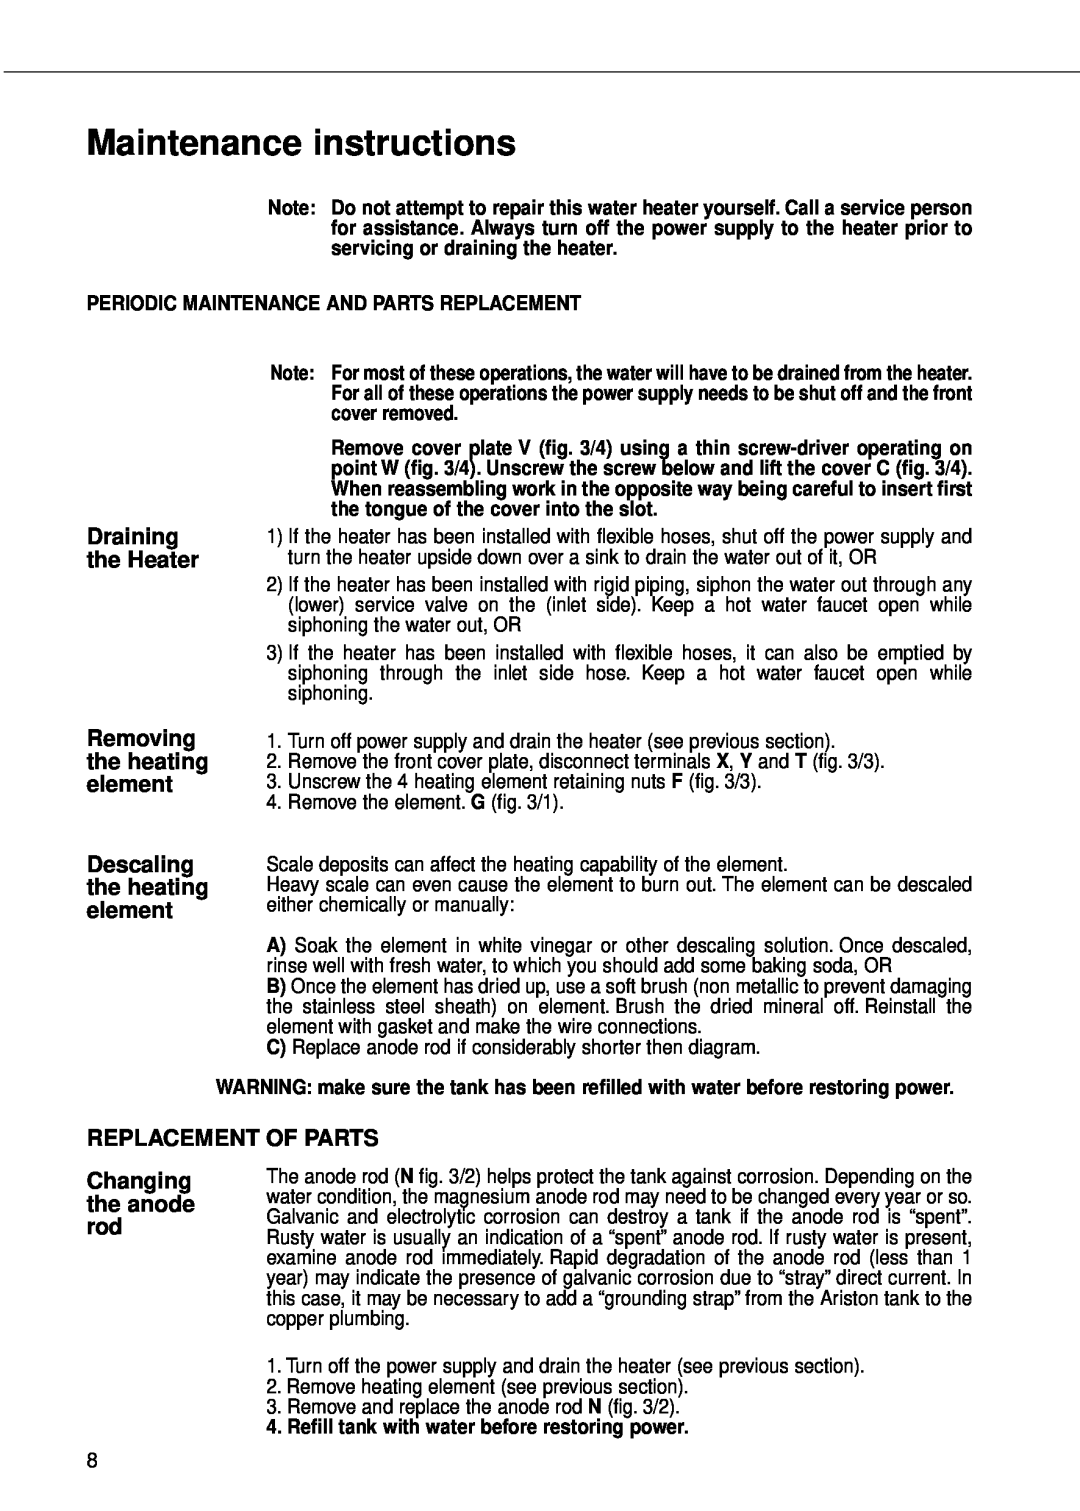 Ariston 4 manual Maintenance instructions, Draining the Heater Removing the heating element, Descaling the heating element 